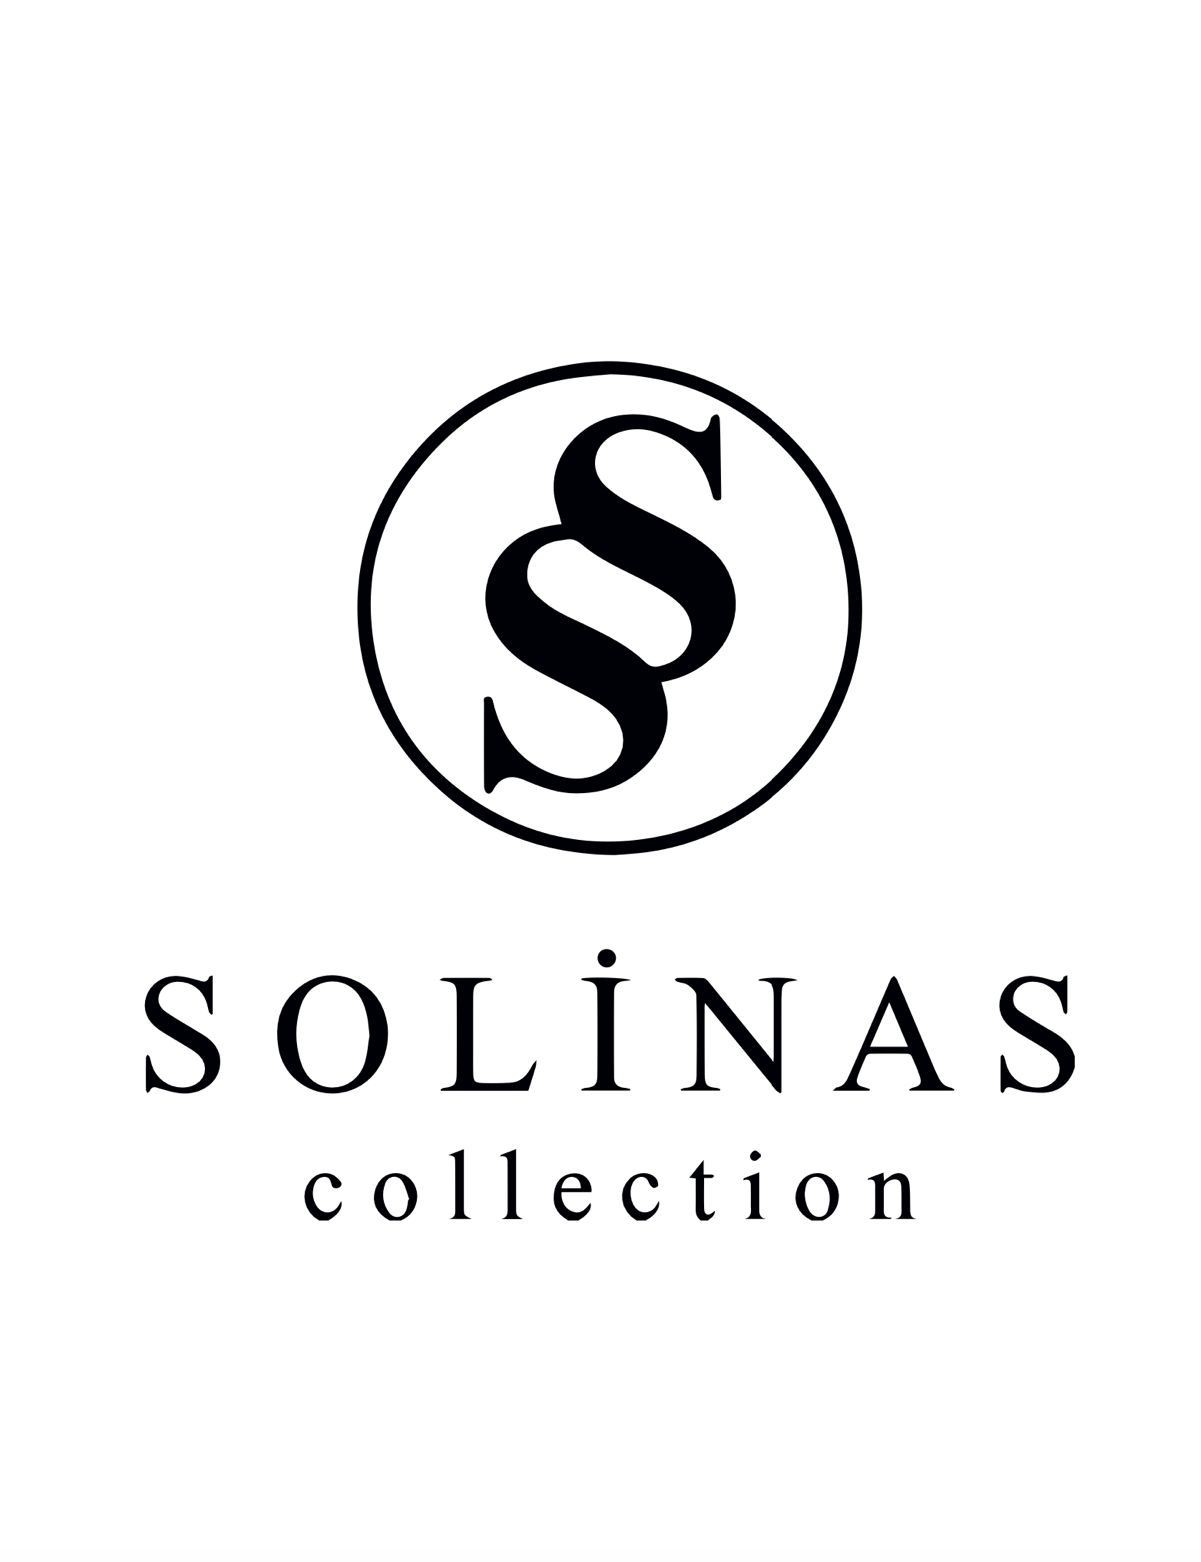 solinascollection